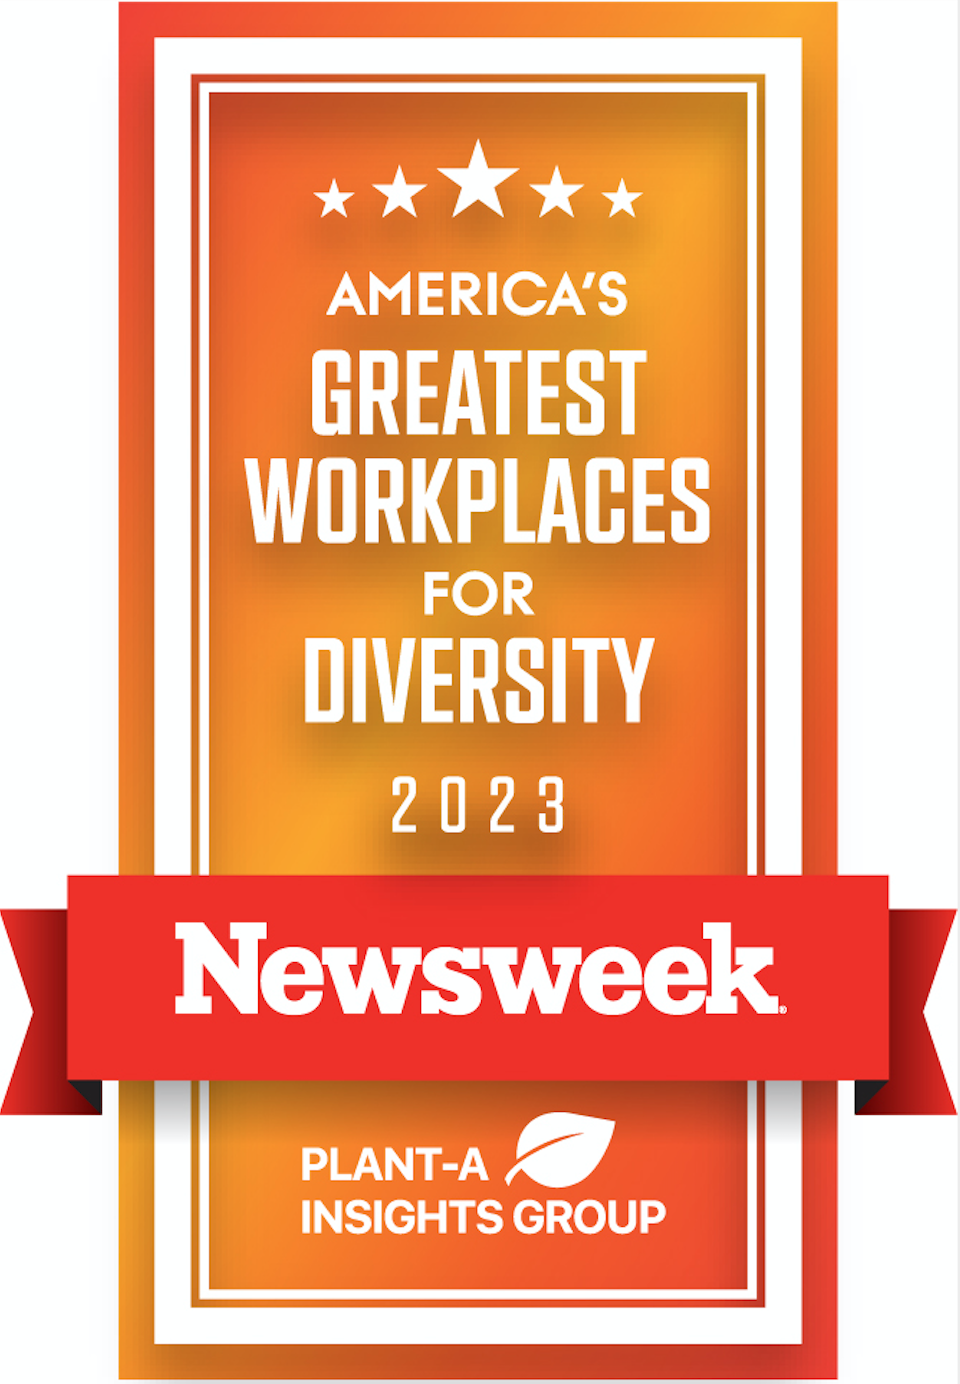 Ochsner Health Among America's Greatest Workplaces for Diversity in